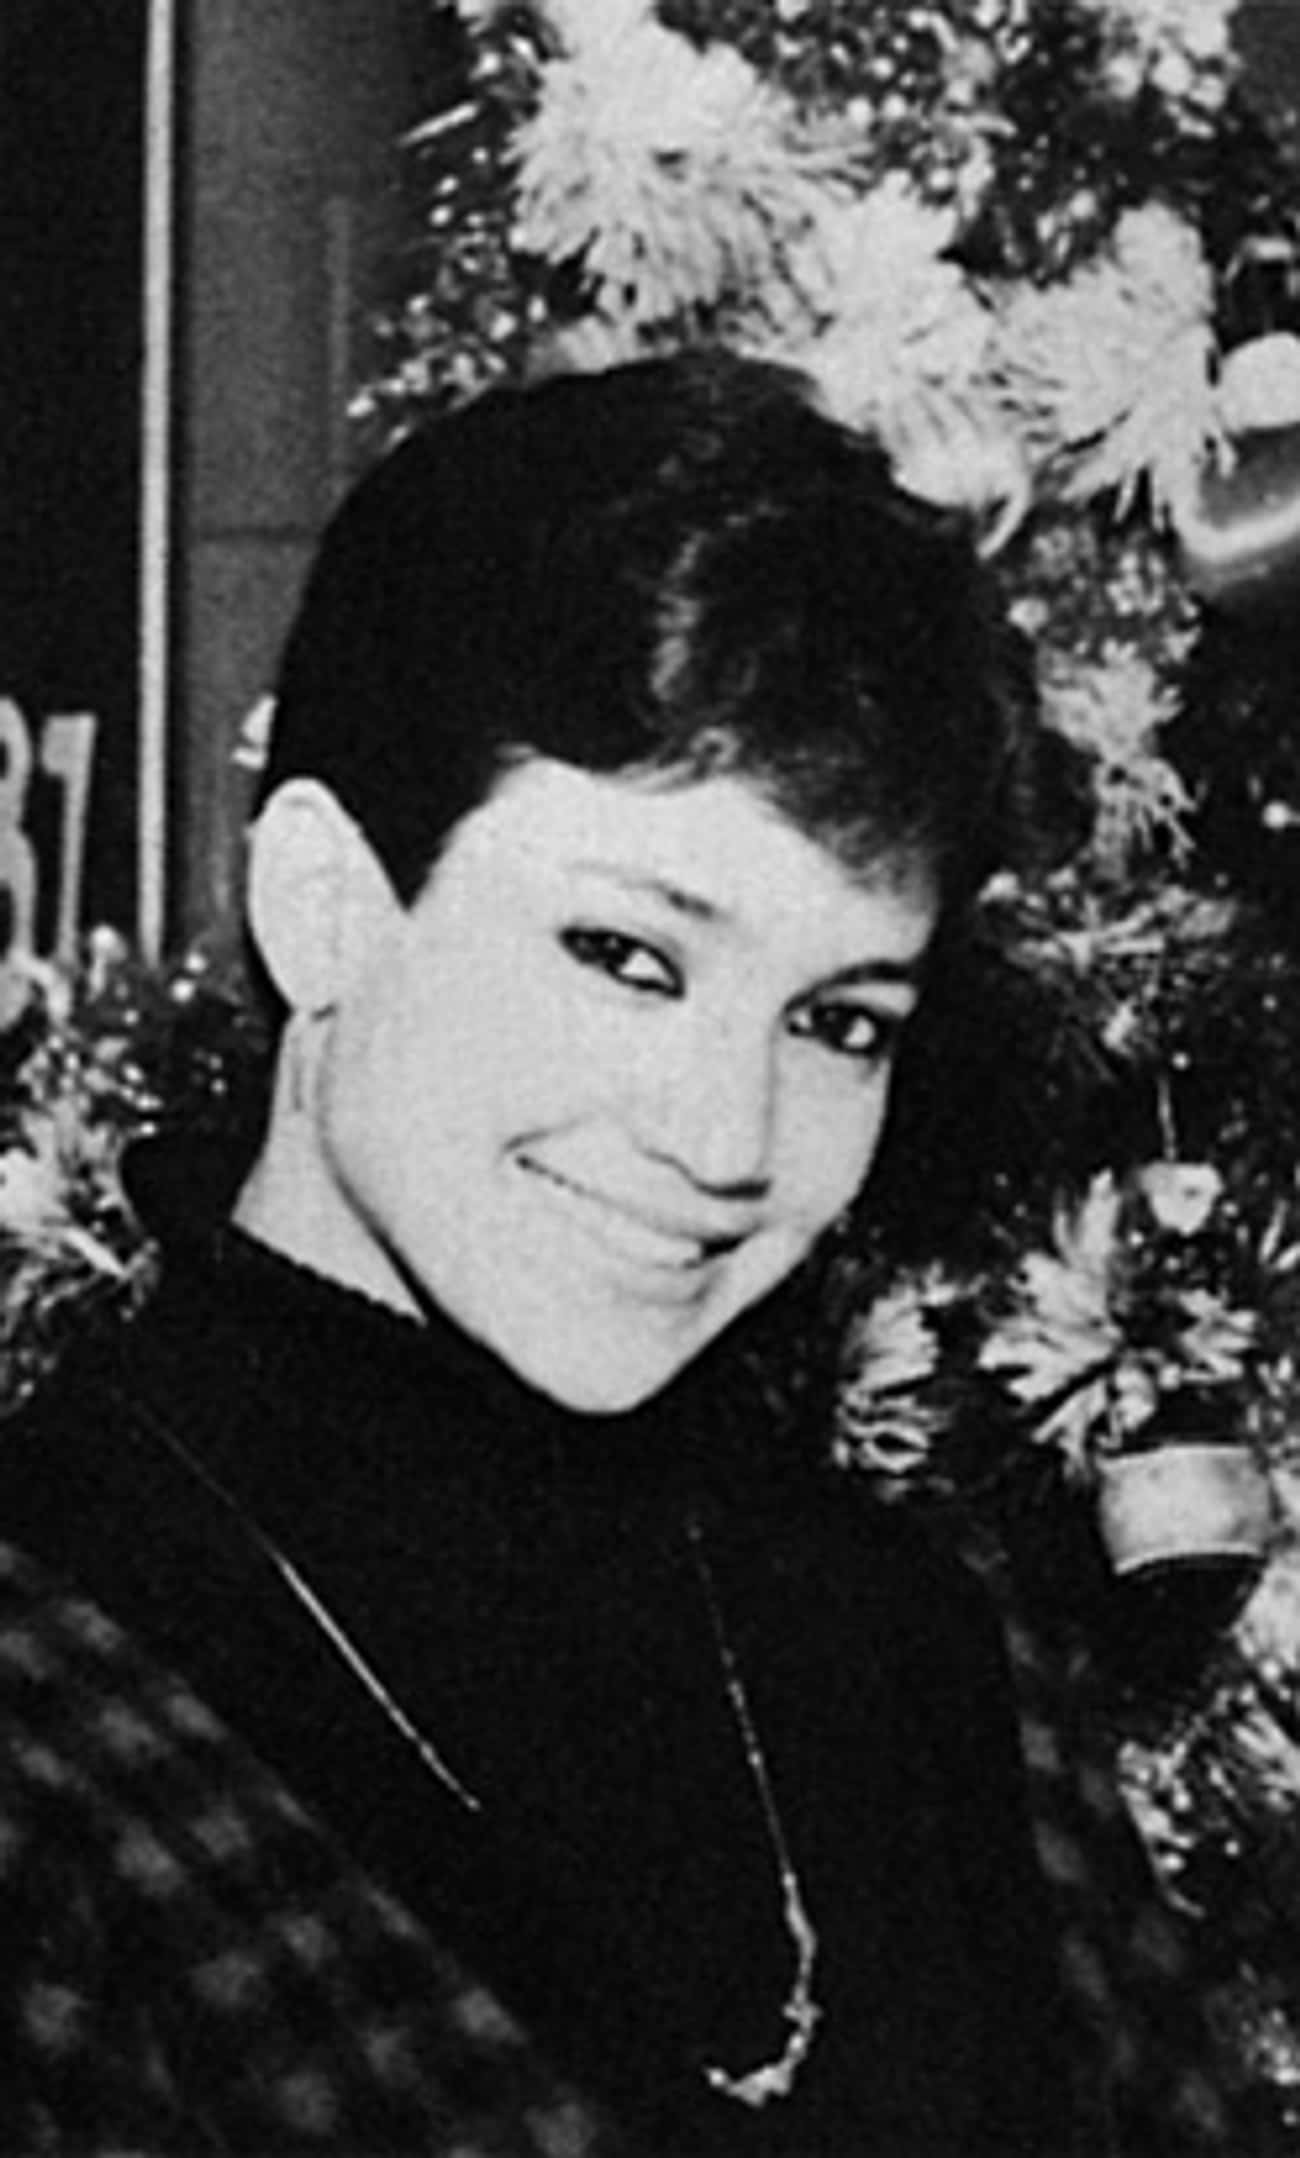 Young Jennifer Lopez Ready For Christmas